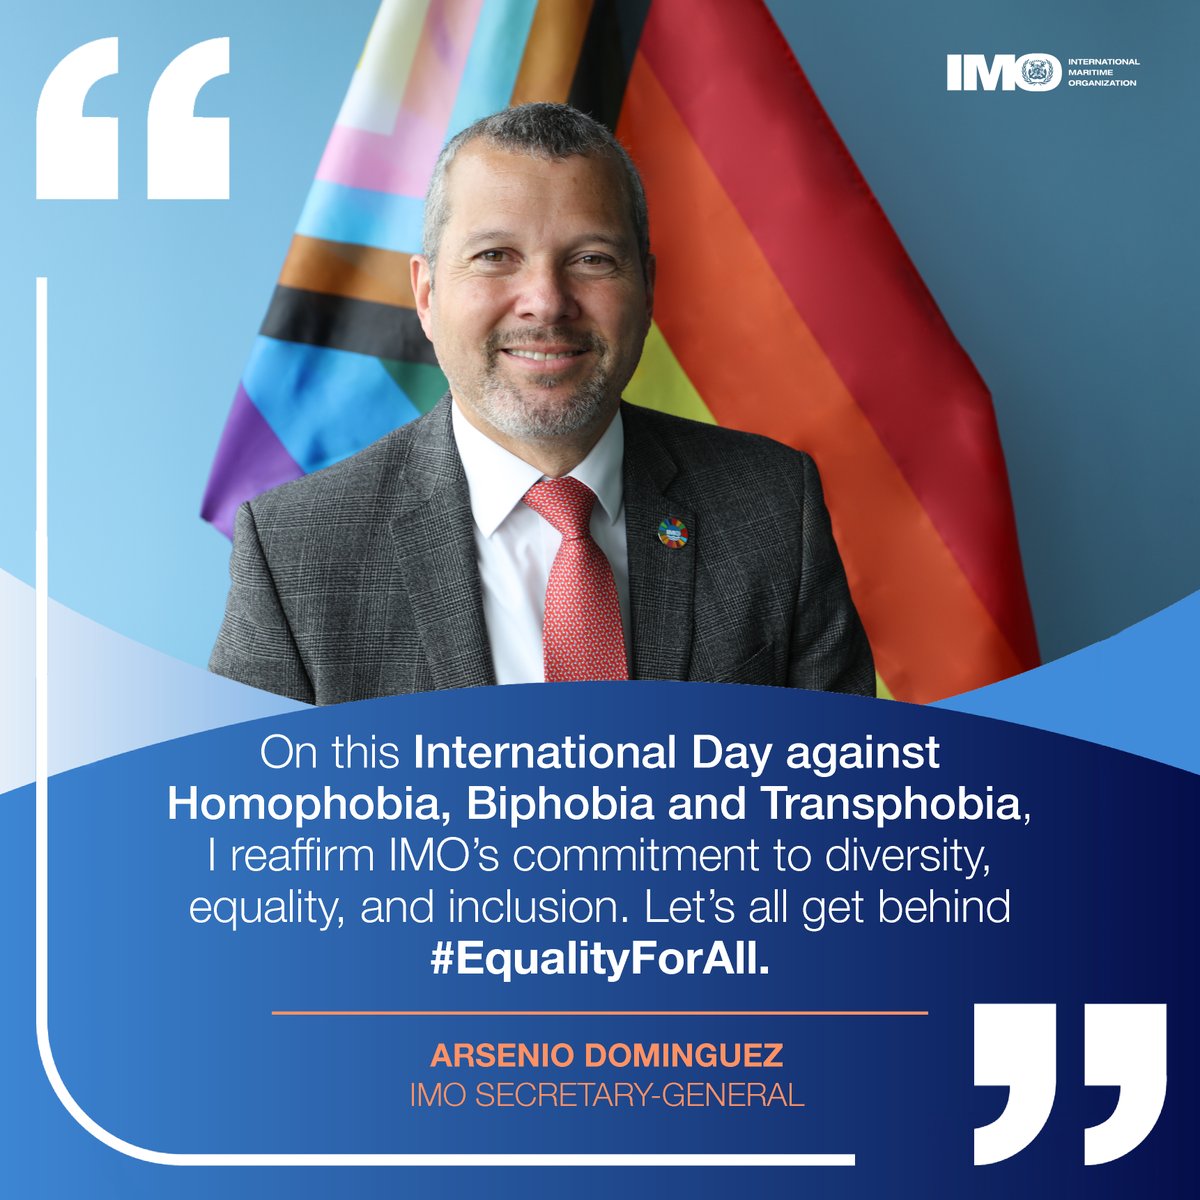 The International Day against Homophobia, Biphobia and Transphobia #IDAHOBIT marks the international community's commitment to embracing diversity and fostering inclusivity. IMO joins the @UN family to celebrate #EqualityForAll